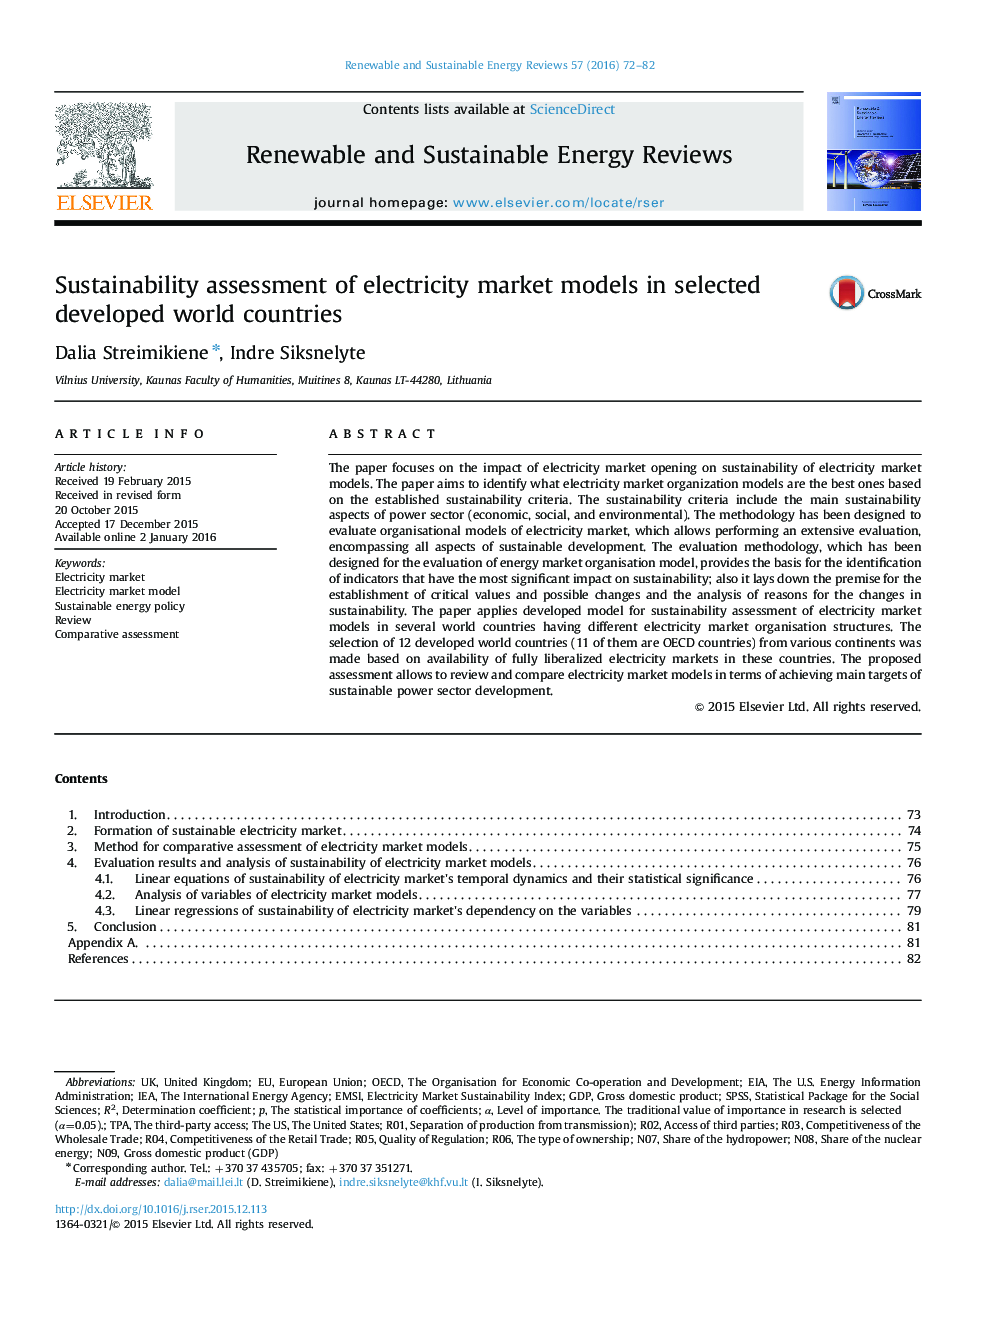 Sustainability assessment of electricity market models in selected developed world countries